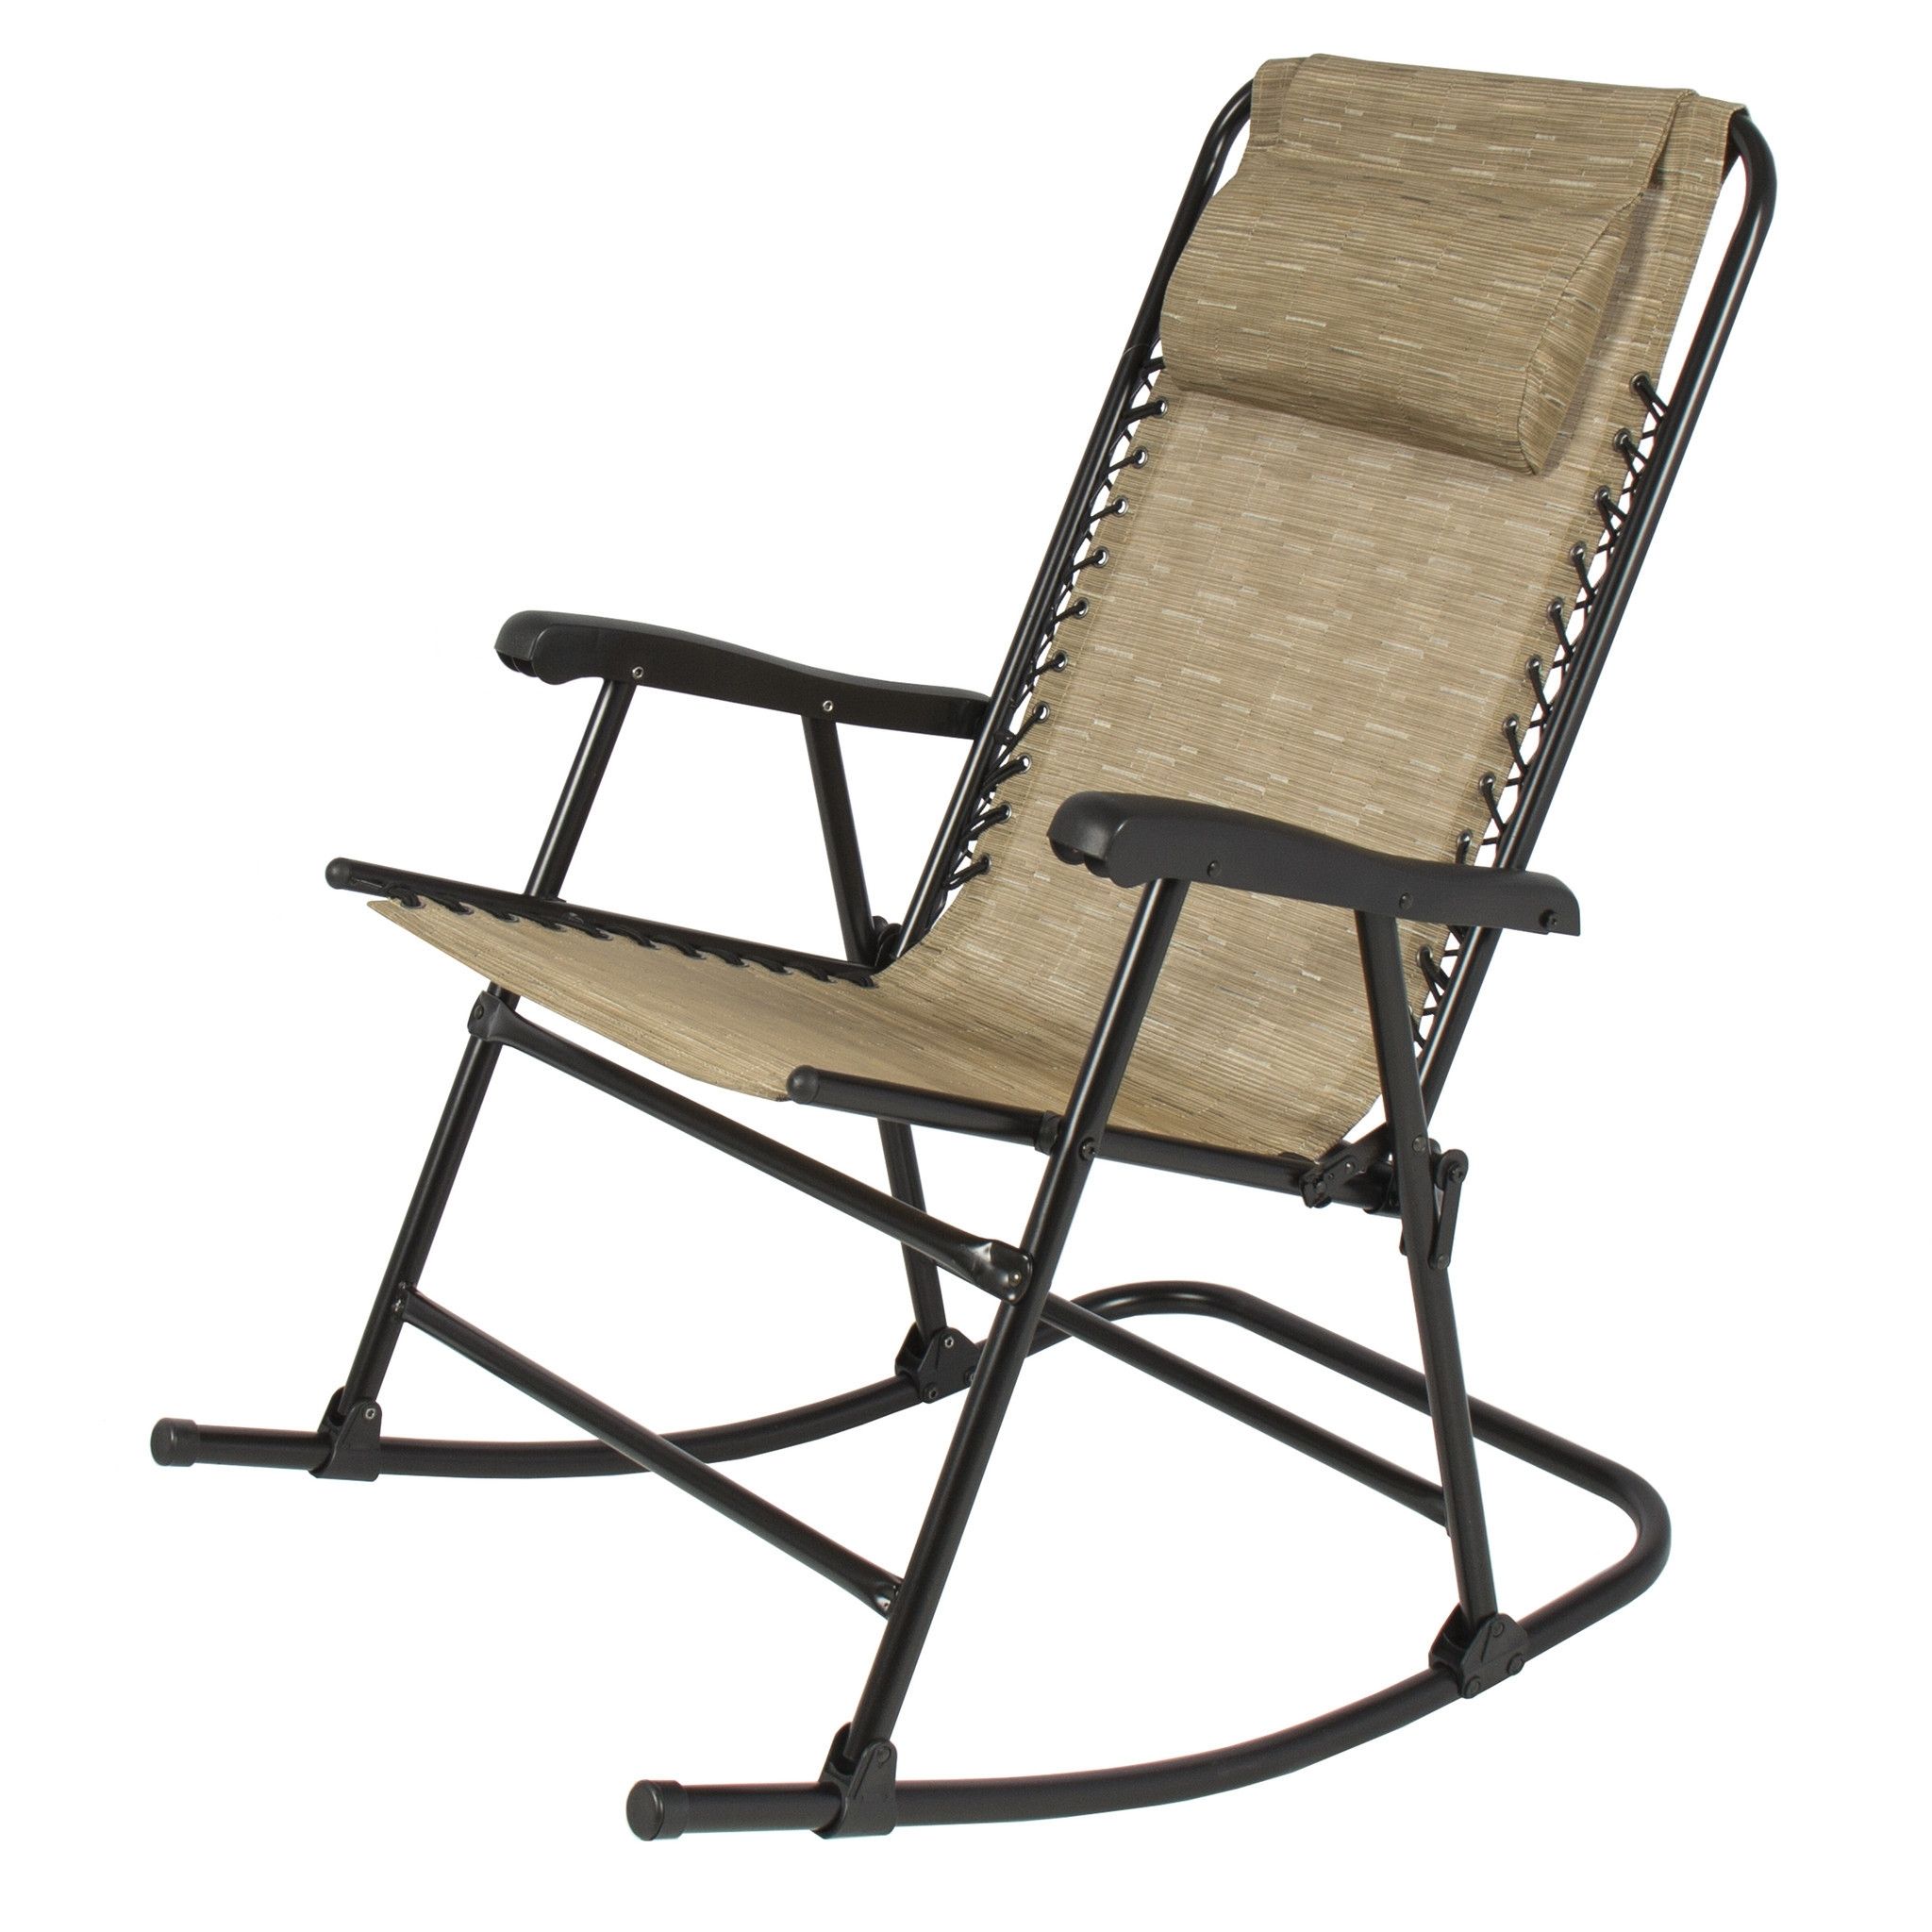 Lovable Patio Folding Chairs Telescope Casual Telaweave Folding For Well Known Aluminum Patio Rocking Chairs (View 7 of 20)